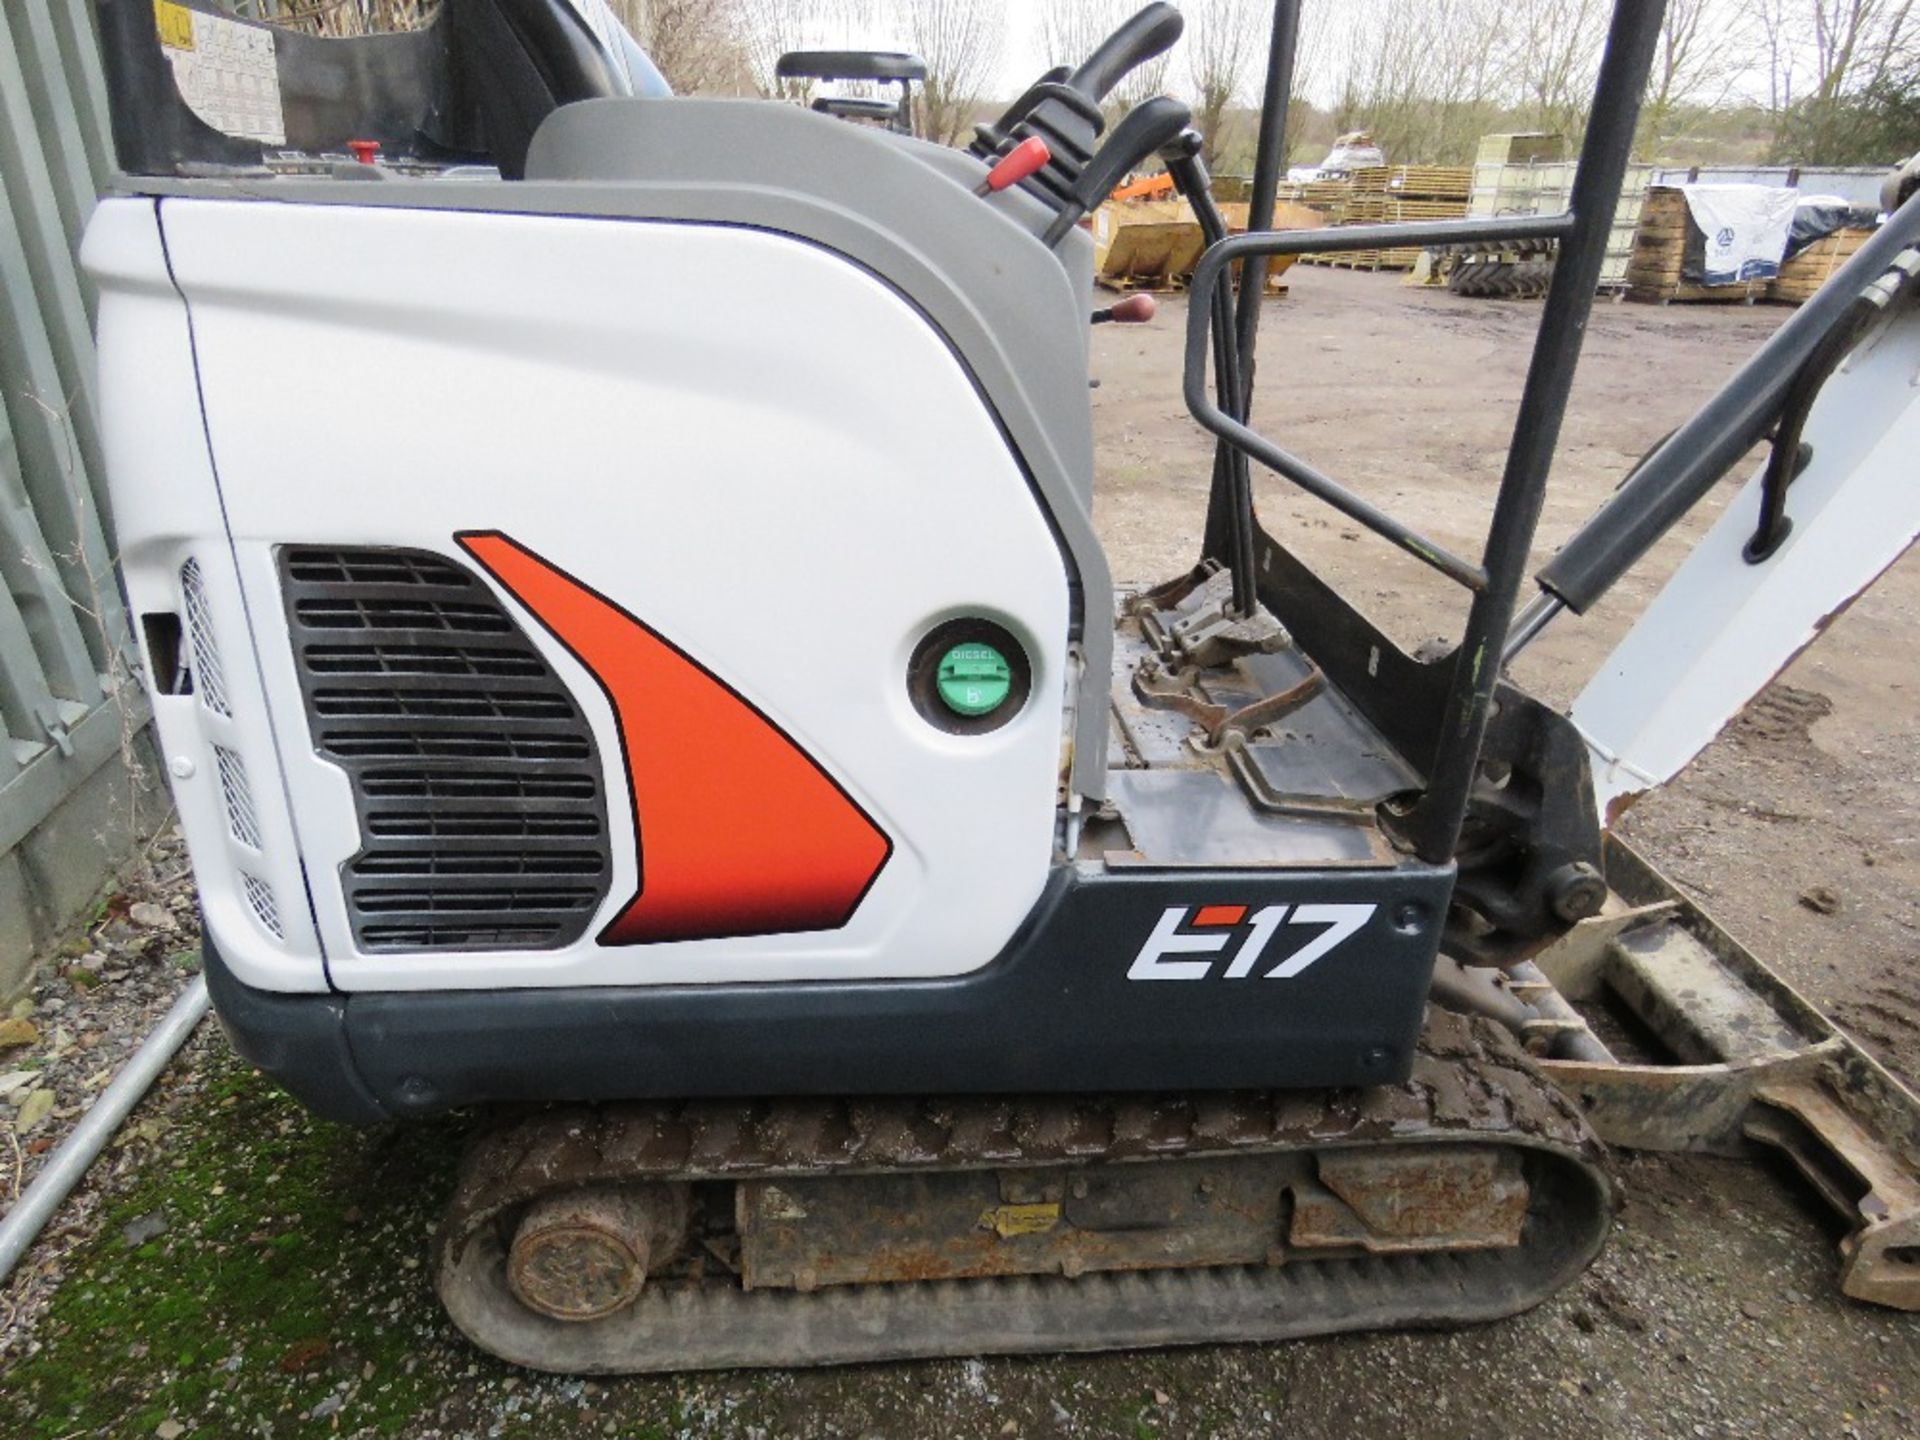 BOBCAT E17 RUBBER TRACKED MINI EXCAVATOR, YEAR 2018. SET OF 3 BUCKETS. 1116.6 REC HOURS. SN:B27H1302 - Image 10 of 15